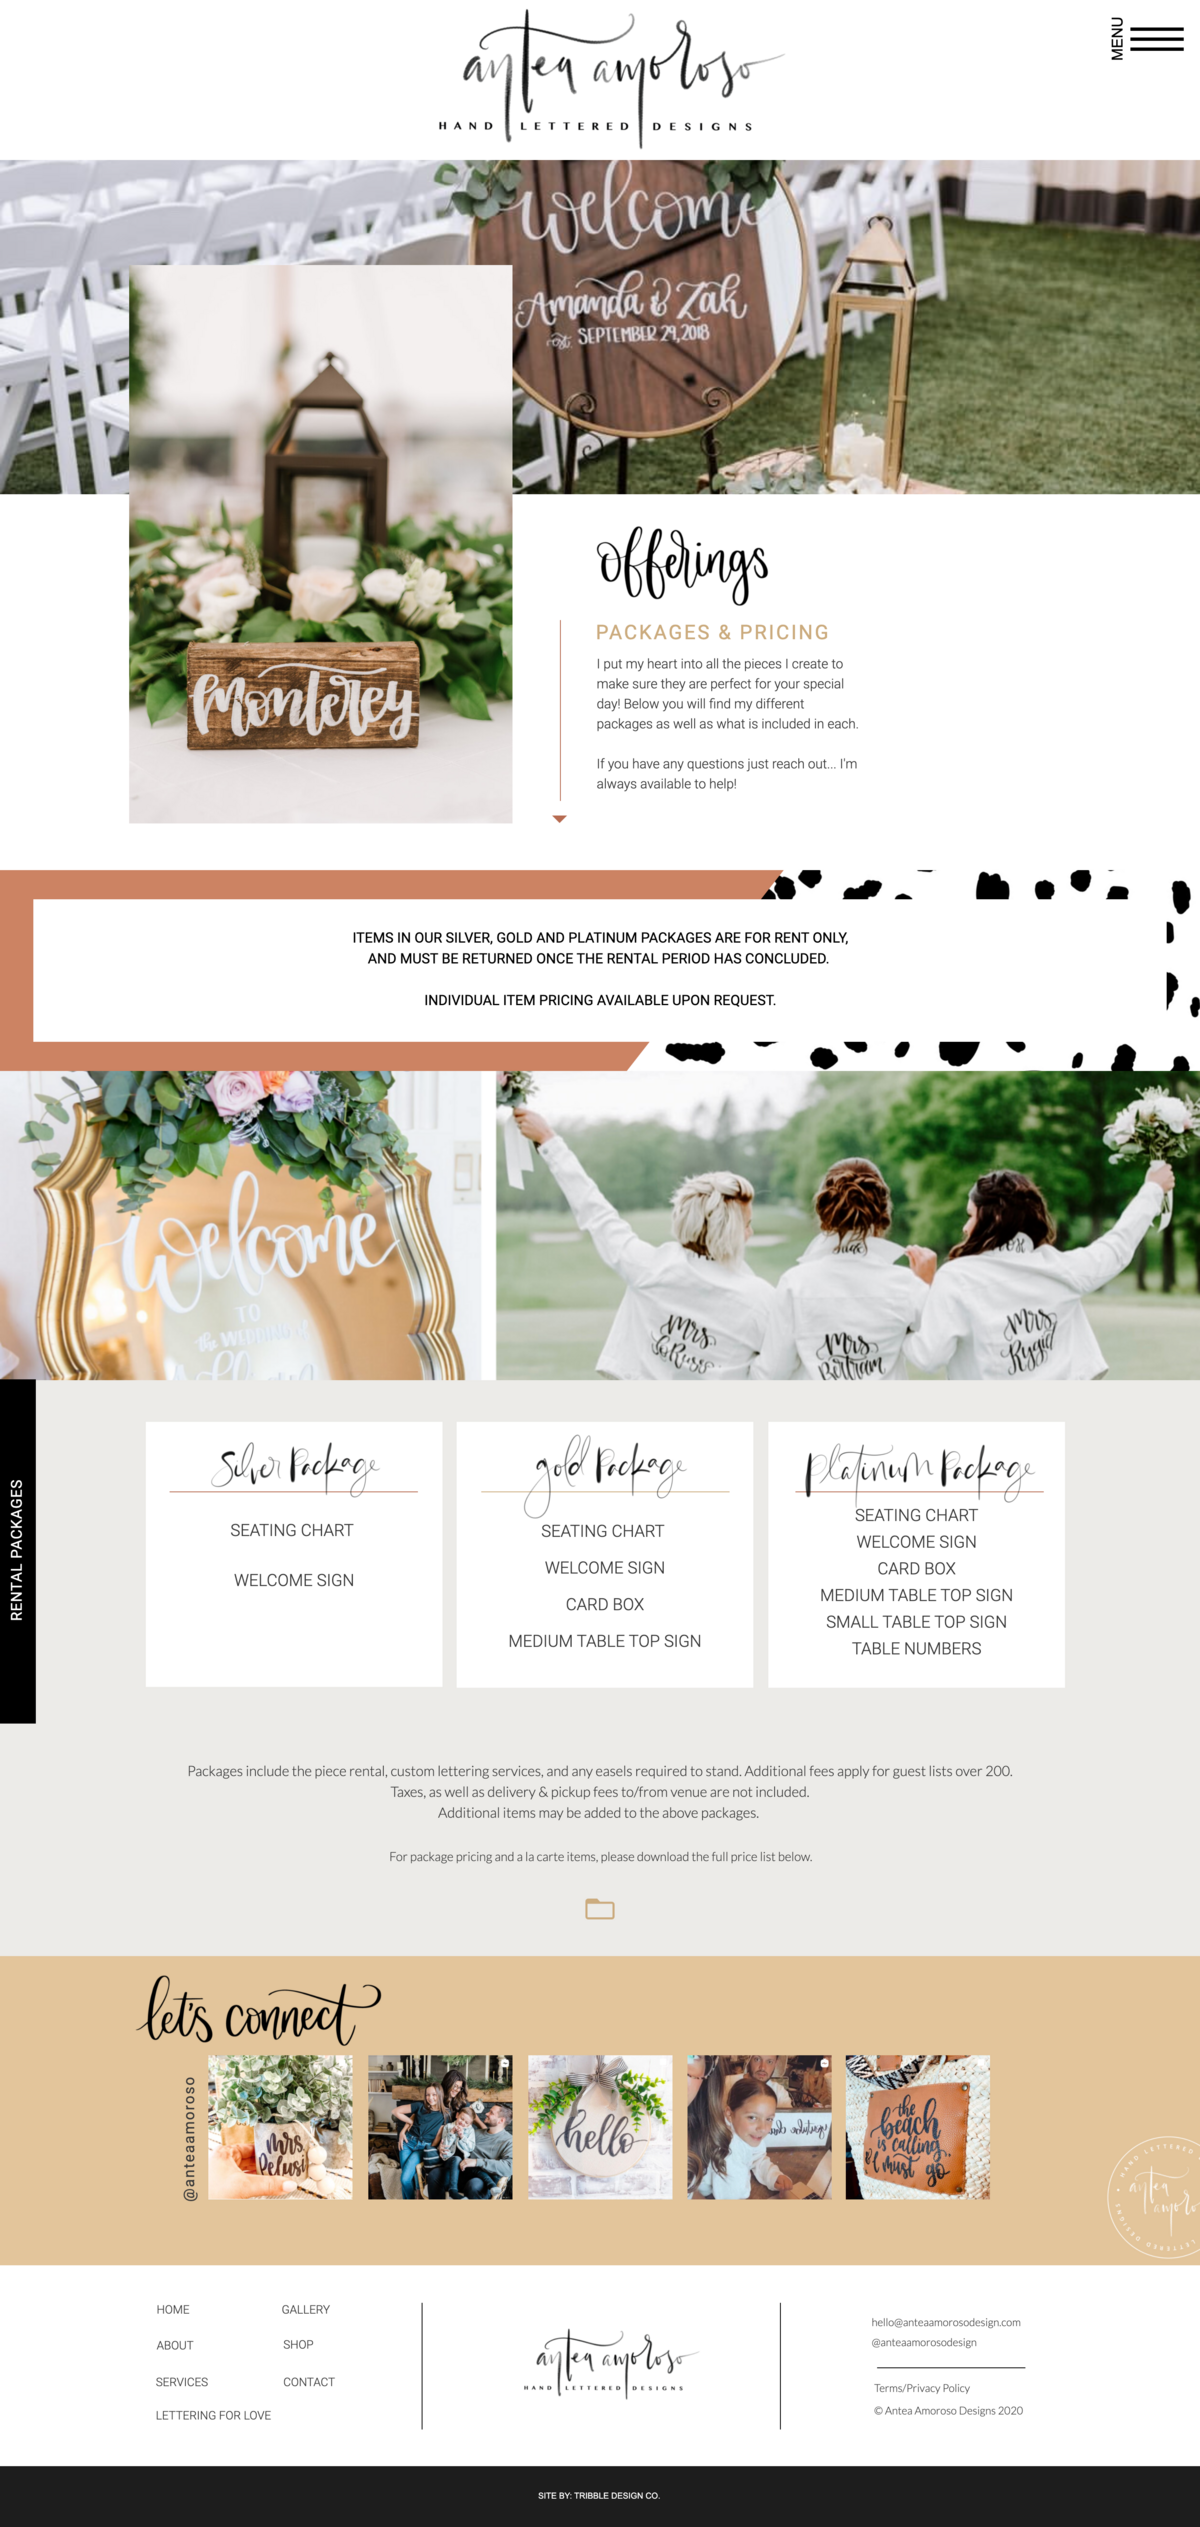 screencapture-antea-amoroso-hand-lettered-designs-1-showitpreview-services-2021-04-17-10_30_27